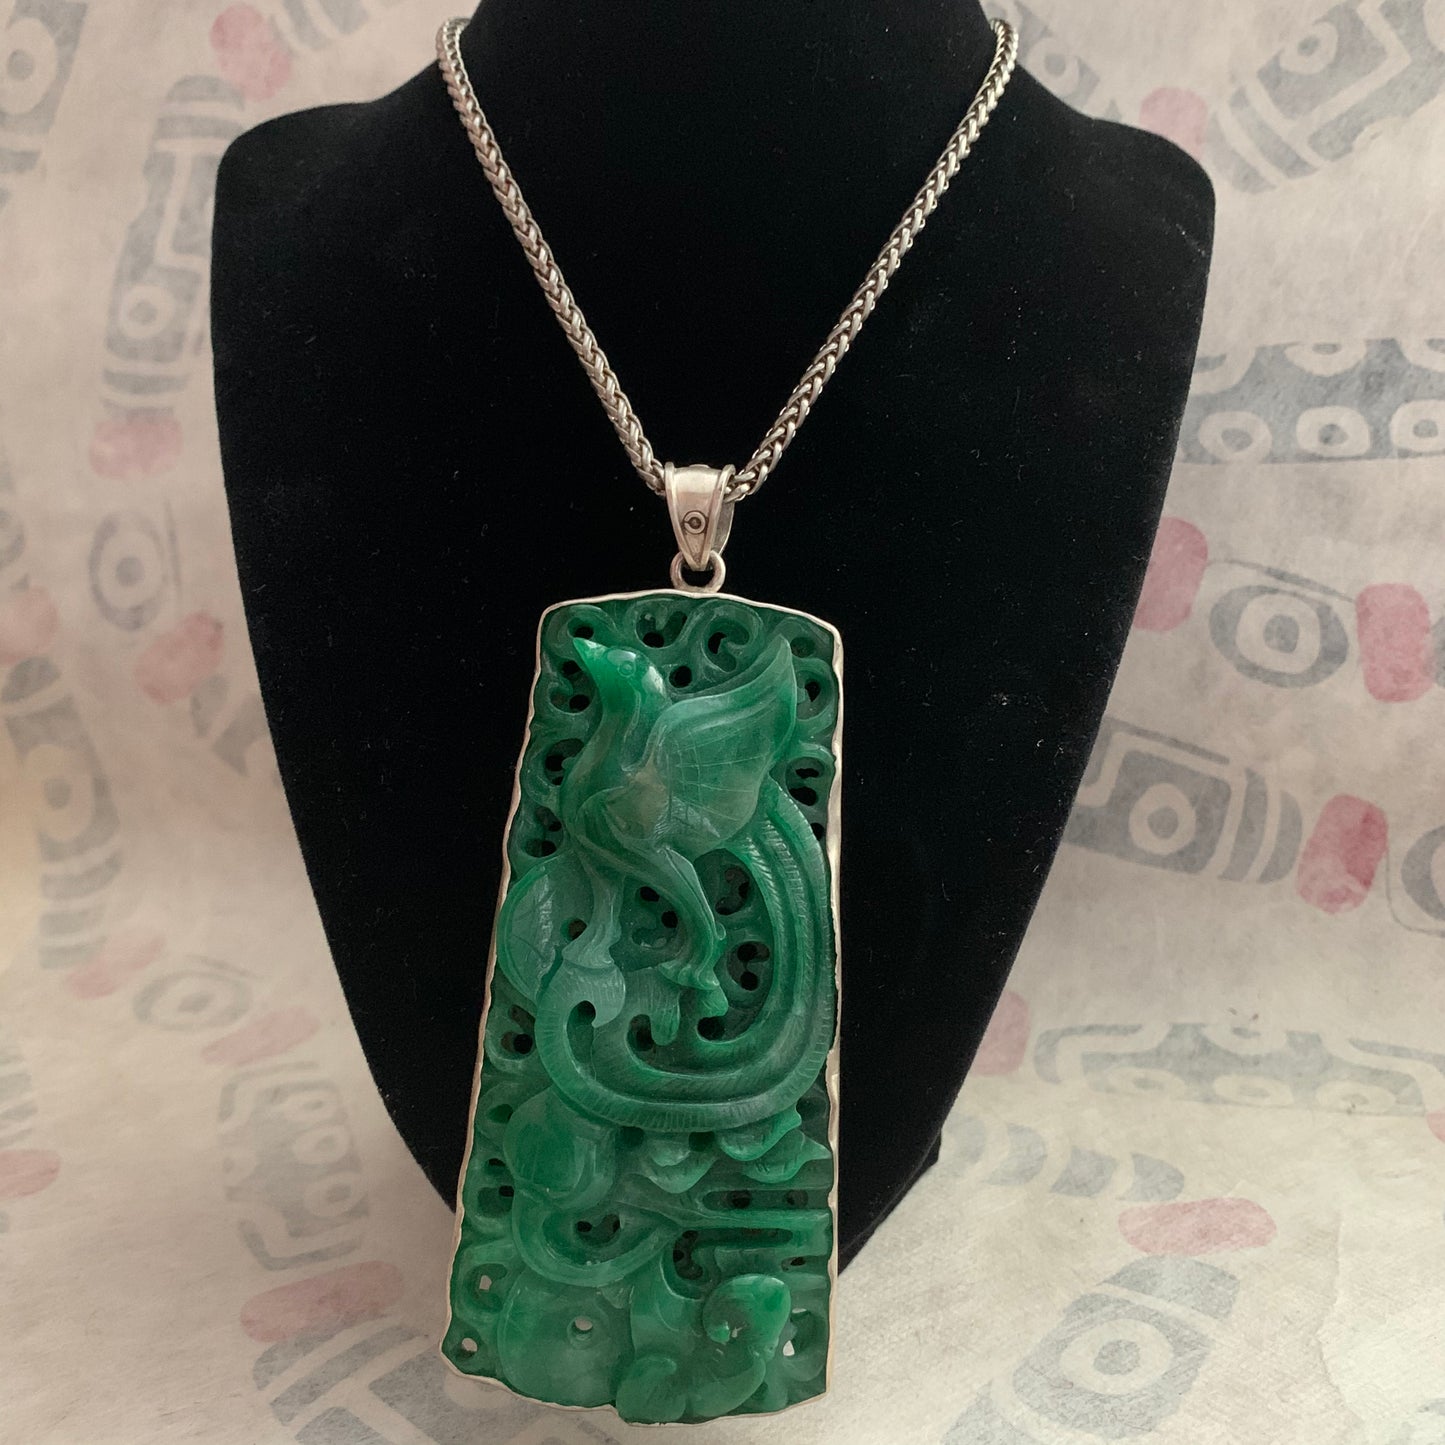 A jade and silver pendant